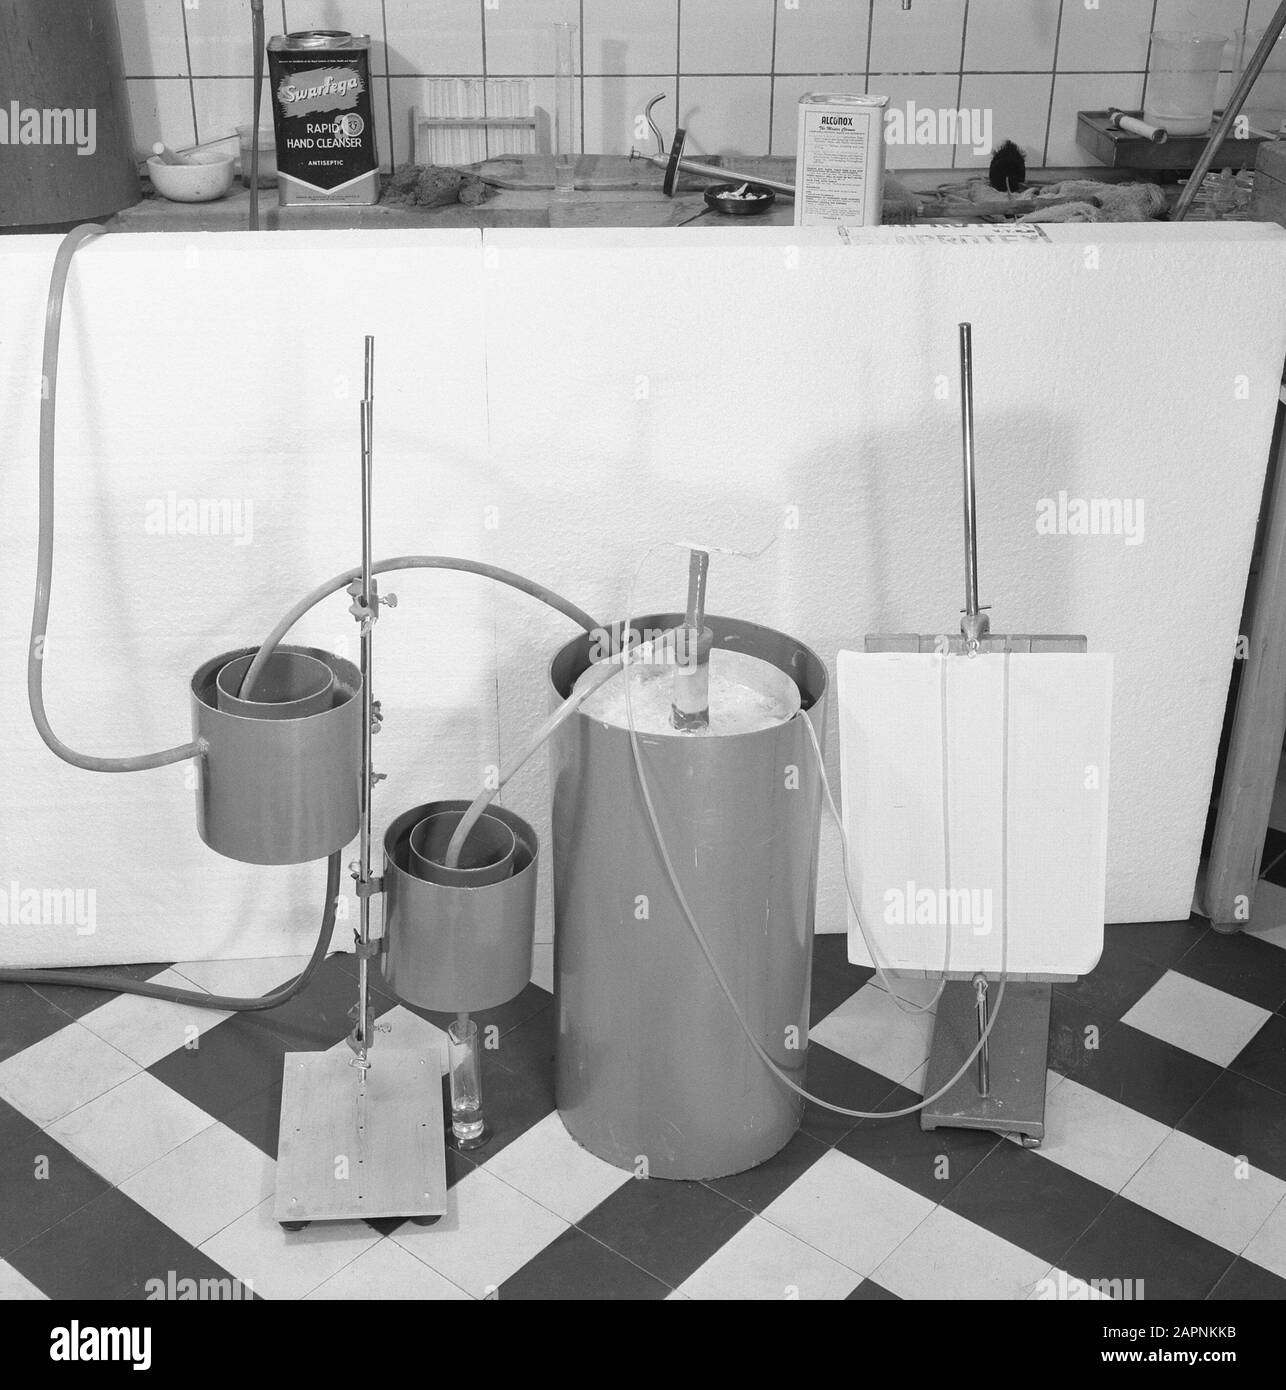 drainage, tests, laboratories, hydrological laboratory department research Date: undated Keywords: drainage, laboratories, tests Person name: hydrological laboratory research department Stock Photo